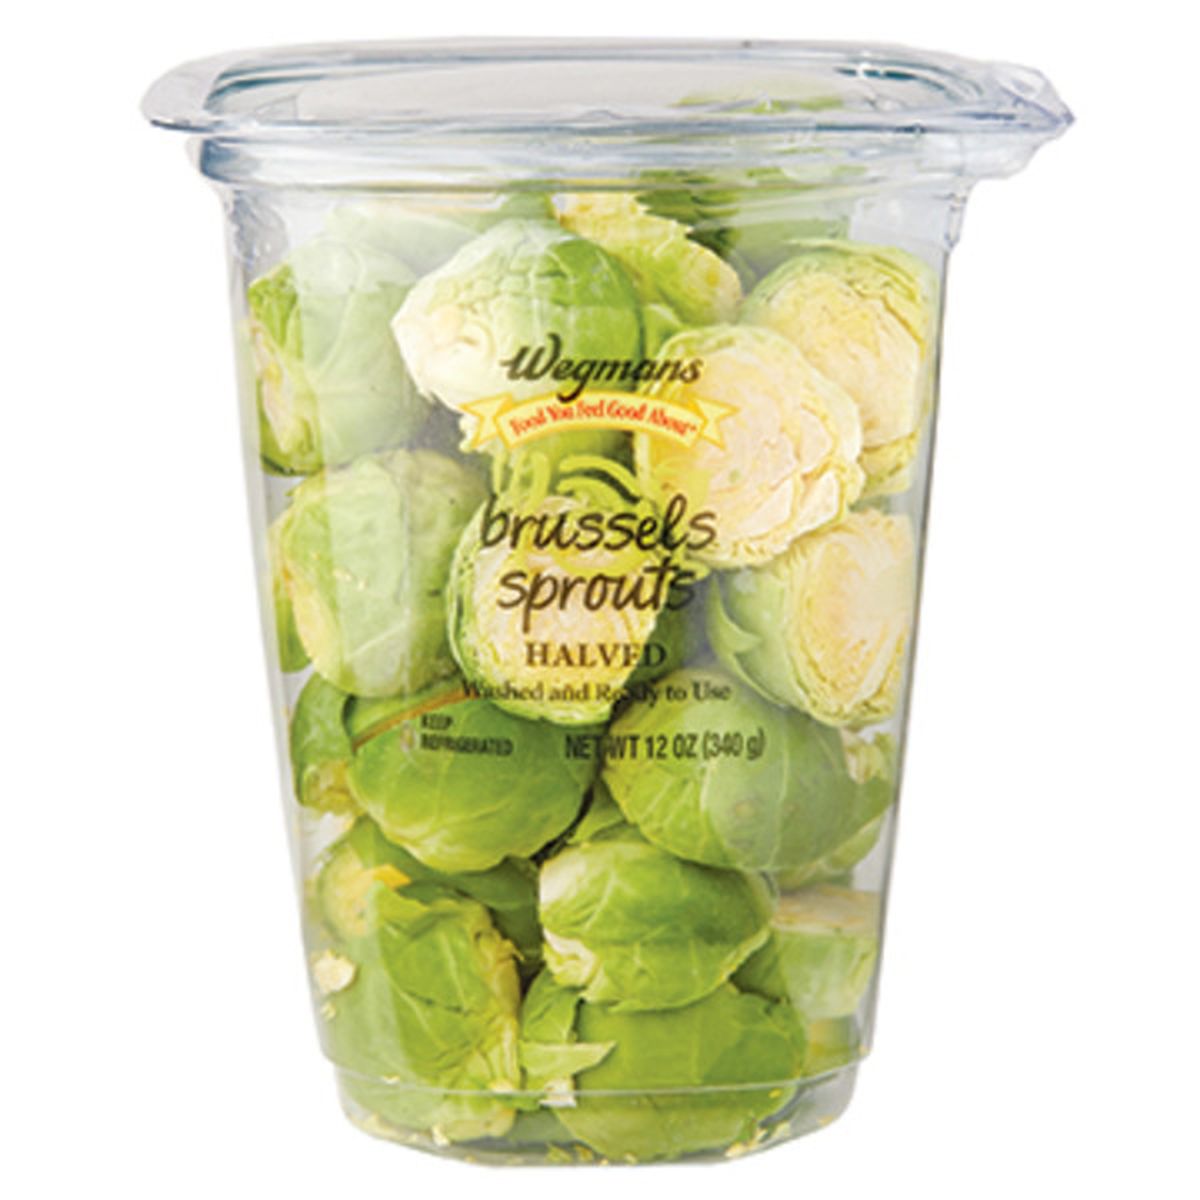 Calories in Wegmans Brussels Sprouts Halved